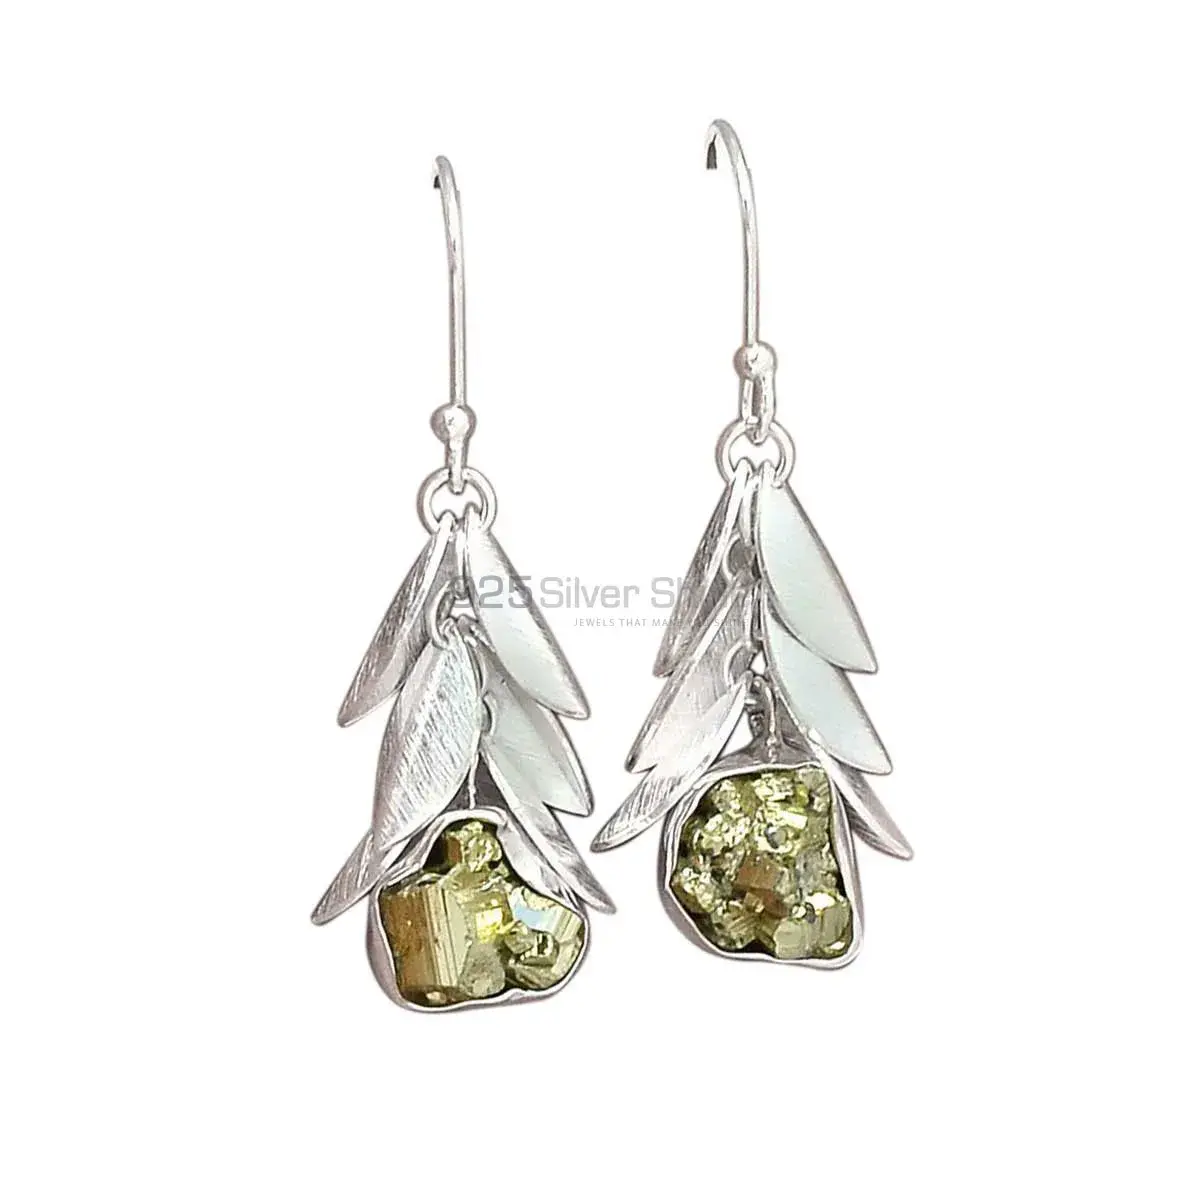 High Quality 925 Sterling Silver Earrings In Pyrite Gemstone Jewelry 925SE3010